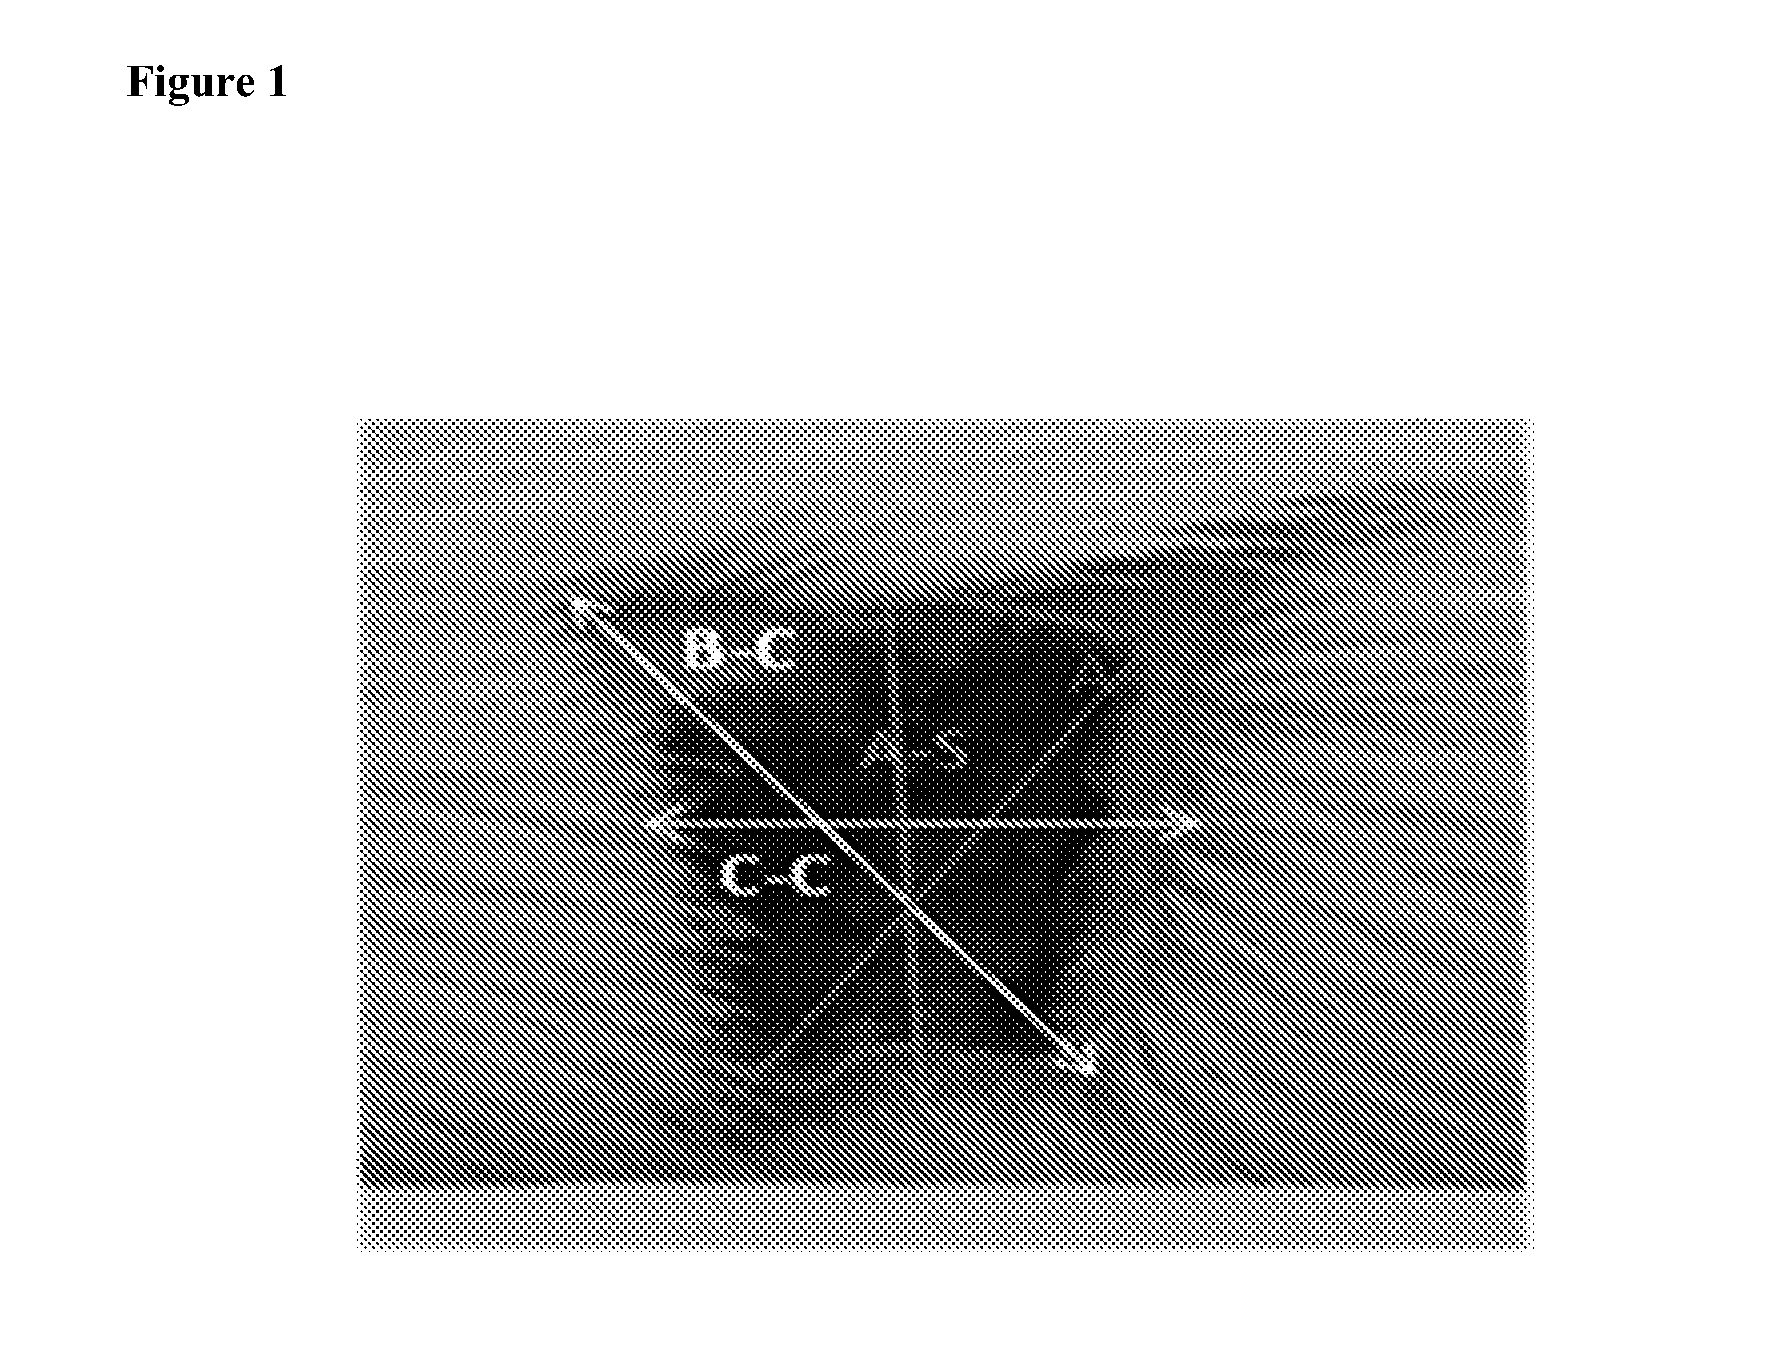 Methods for limiting development of a skin wound